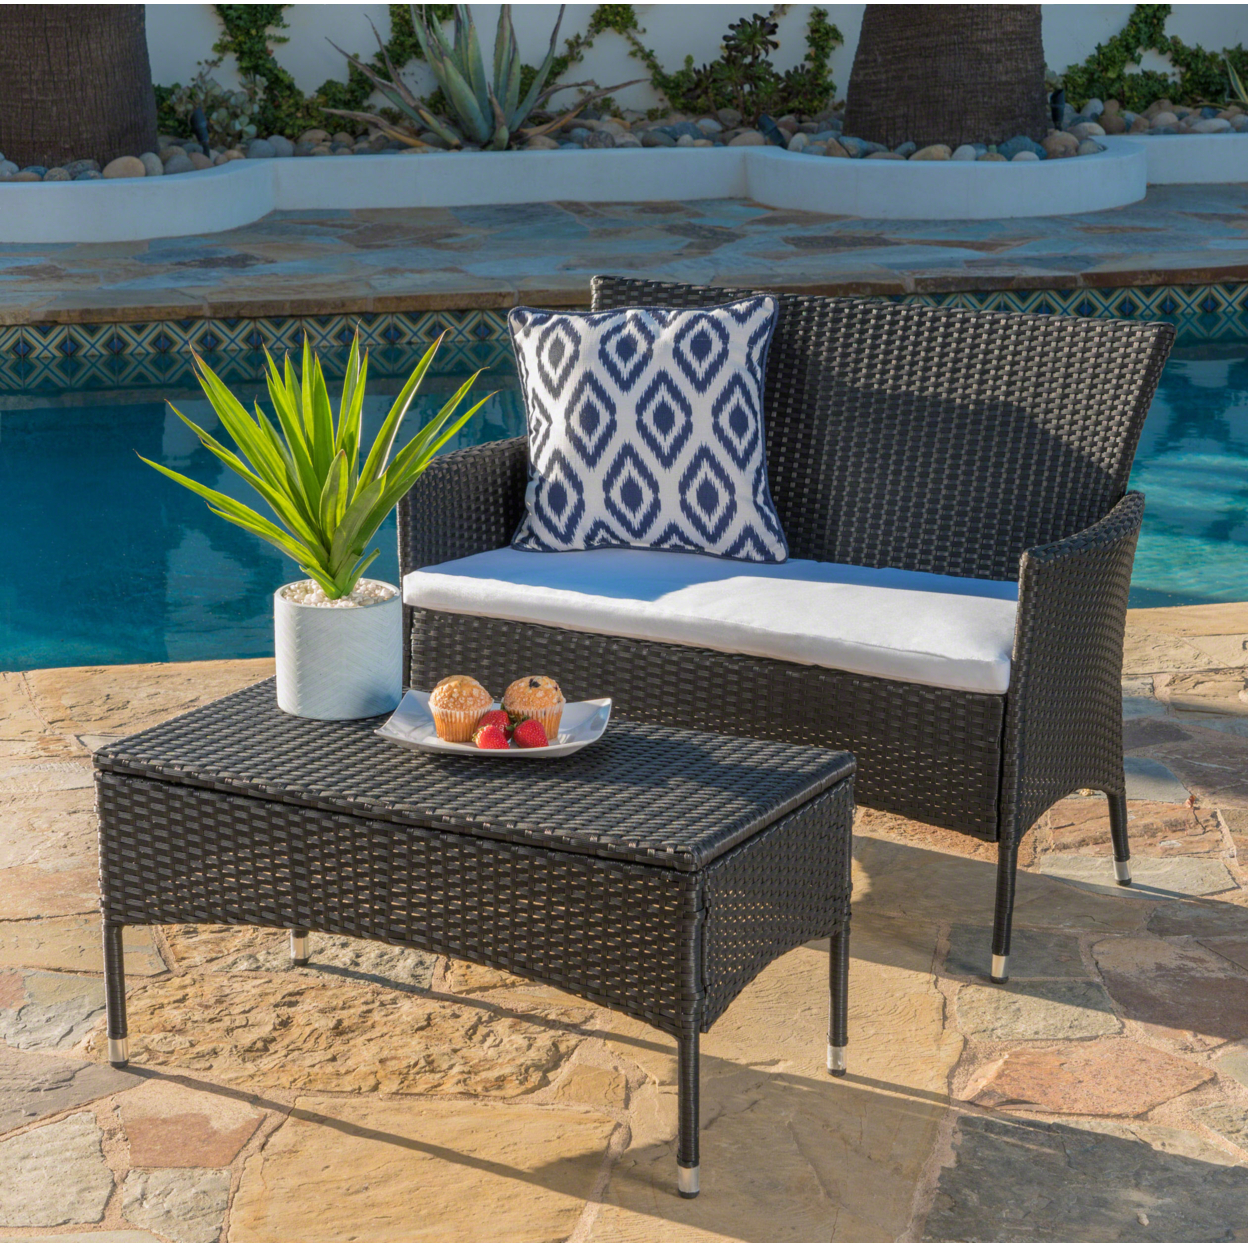 Montague Outdoor Wicker Loveseat And Coffee Table Set - Multibrown / Beige